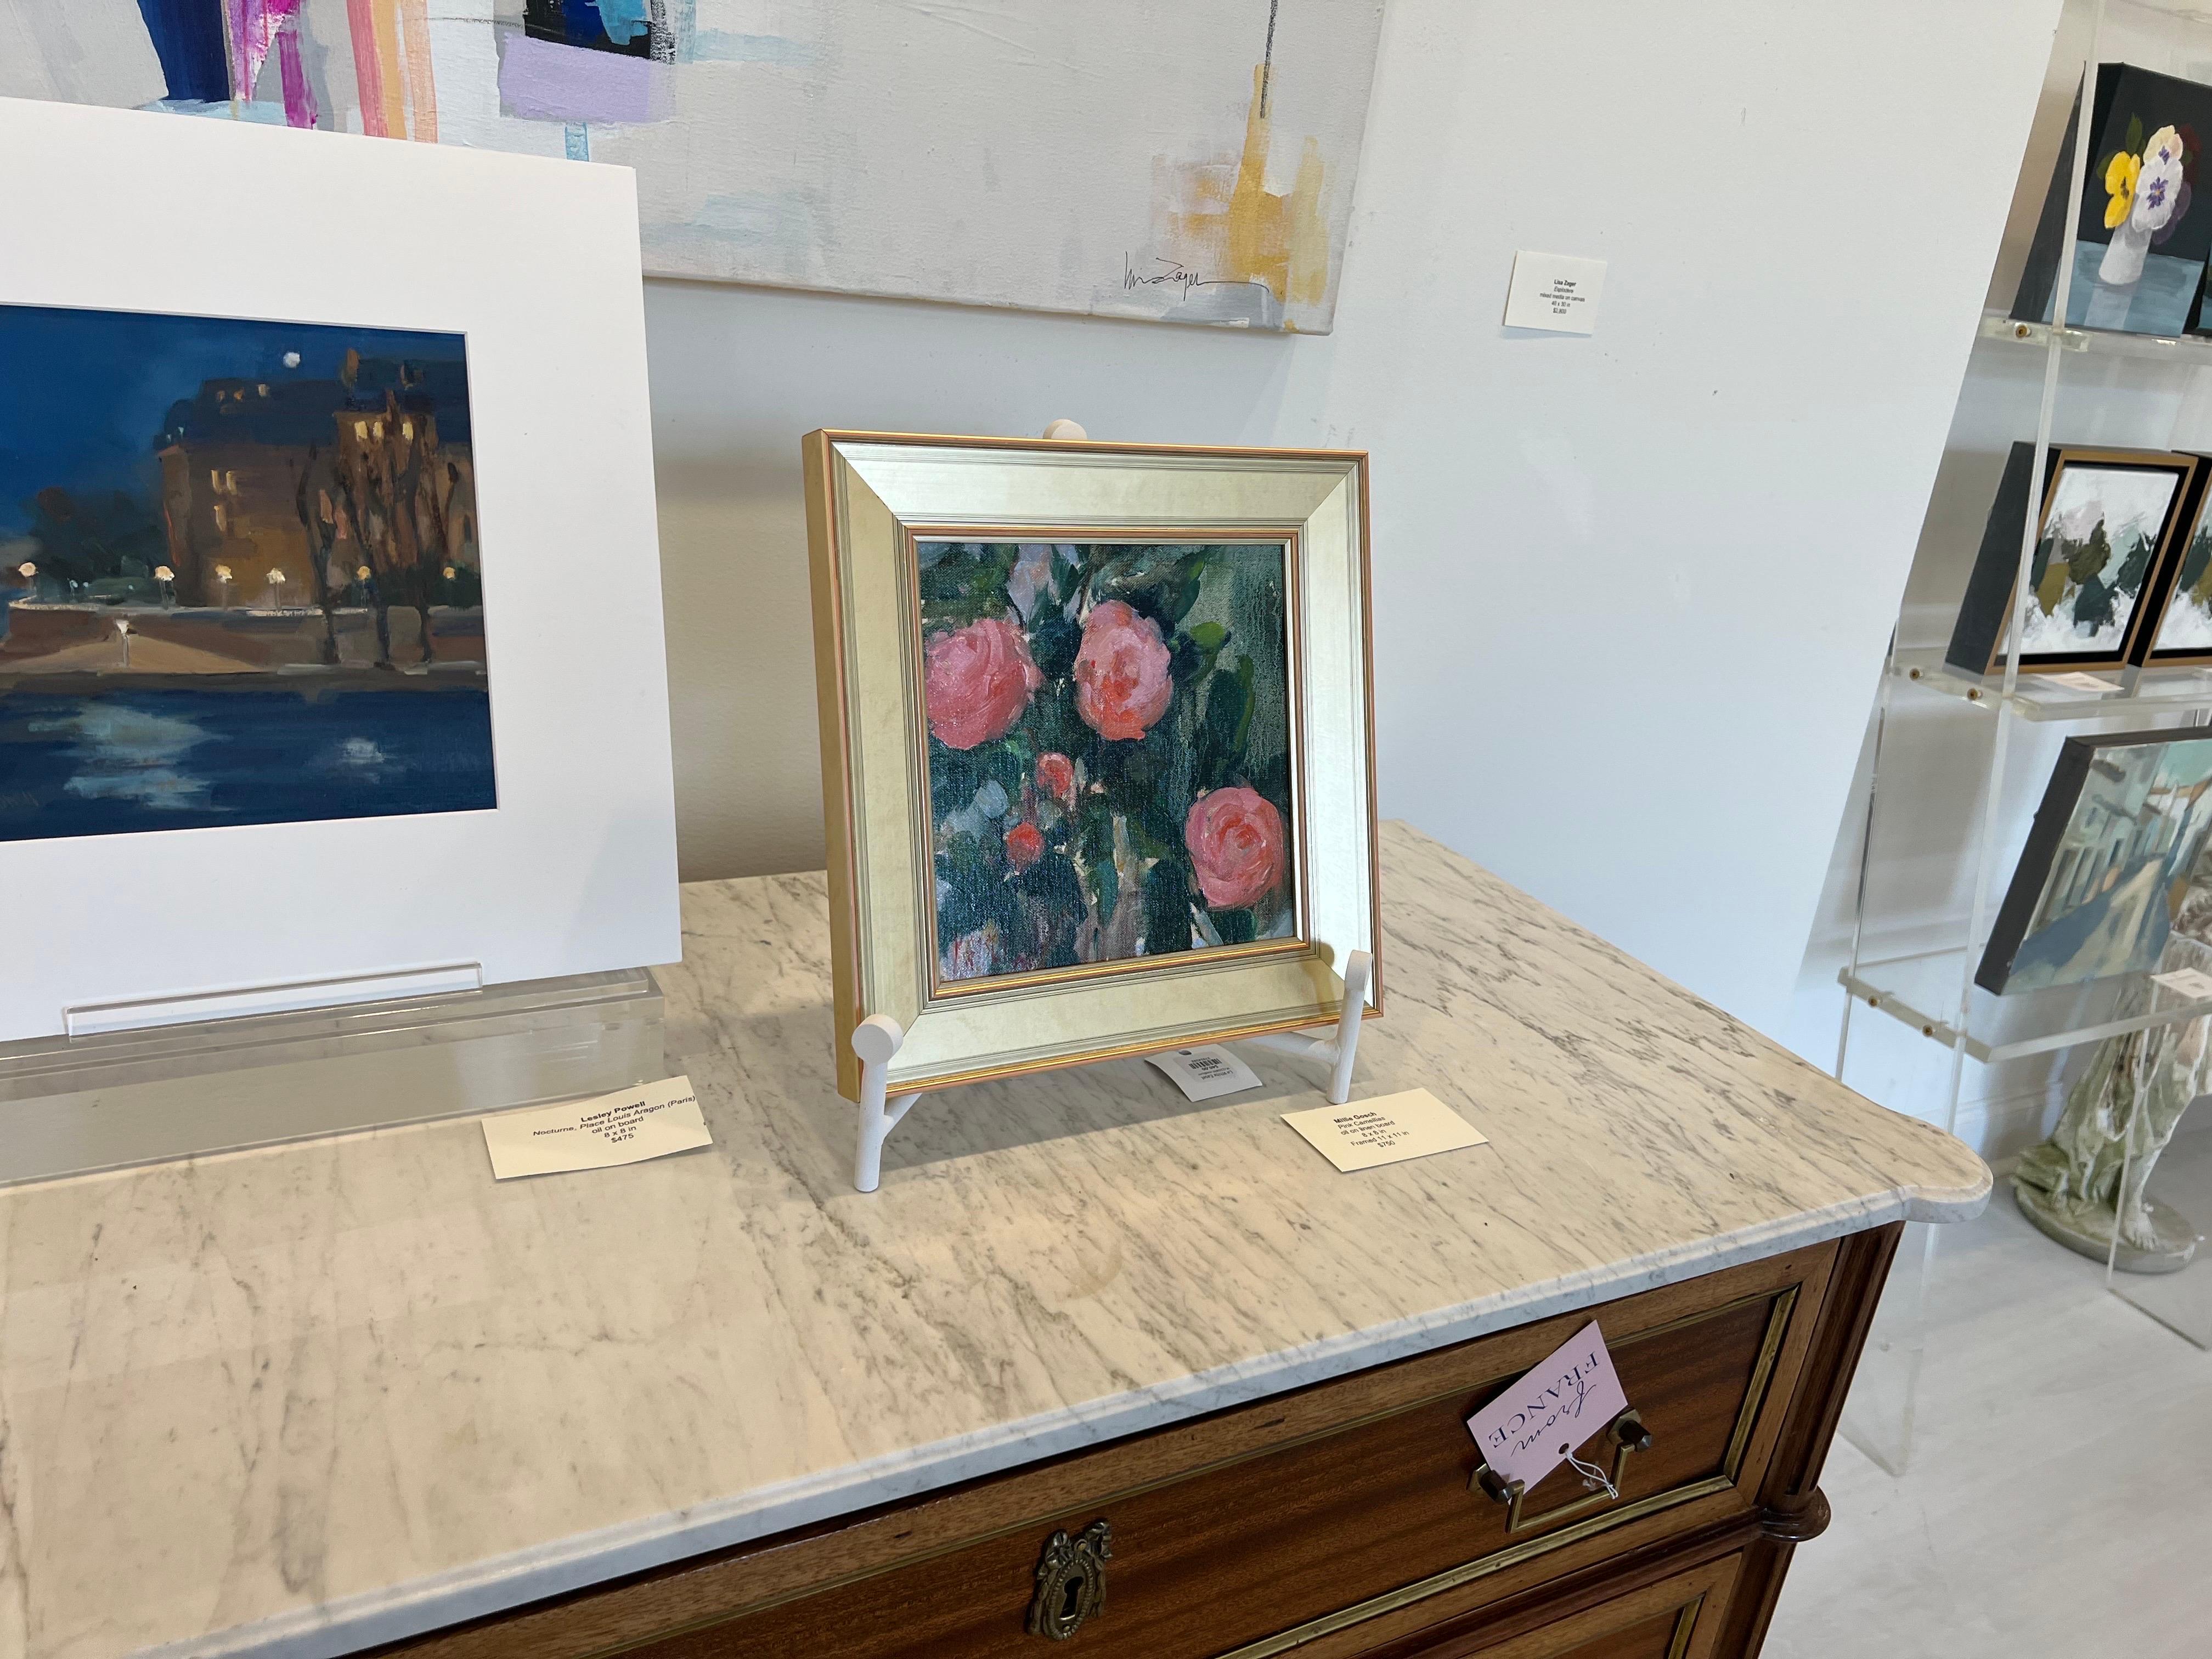 Pink Camellias by Millie Gosch, Small Square Framed Oil Still-Life Painting 2